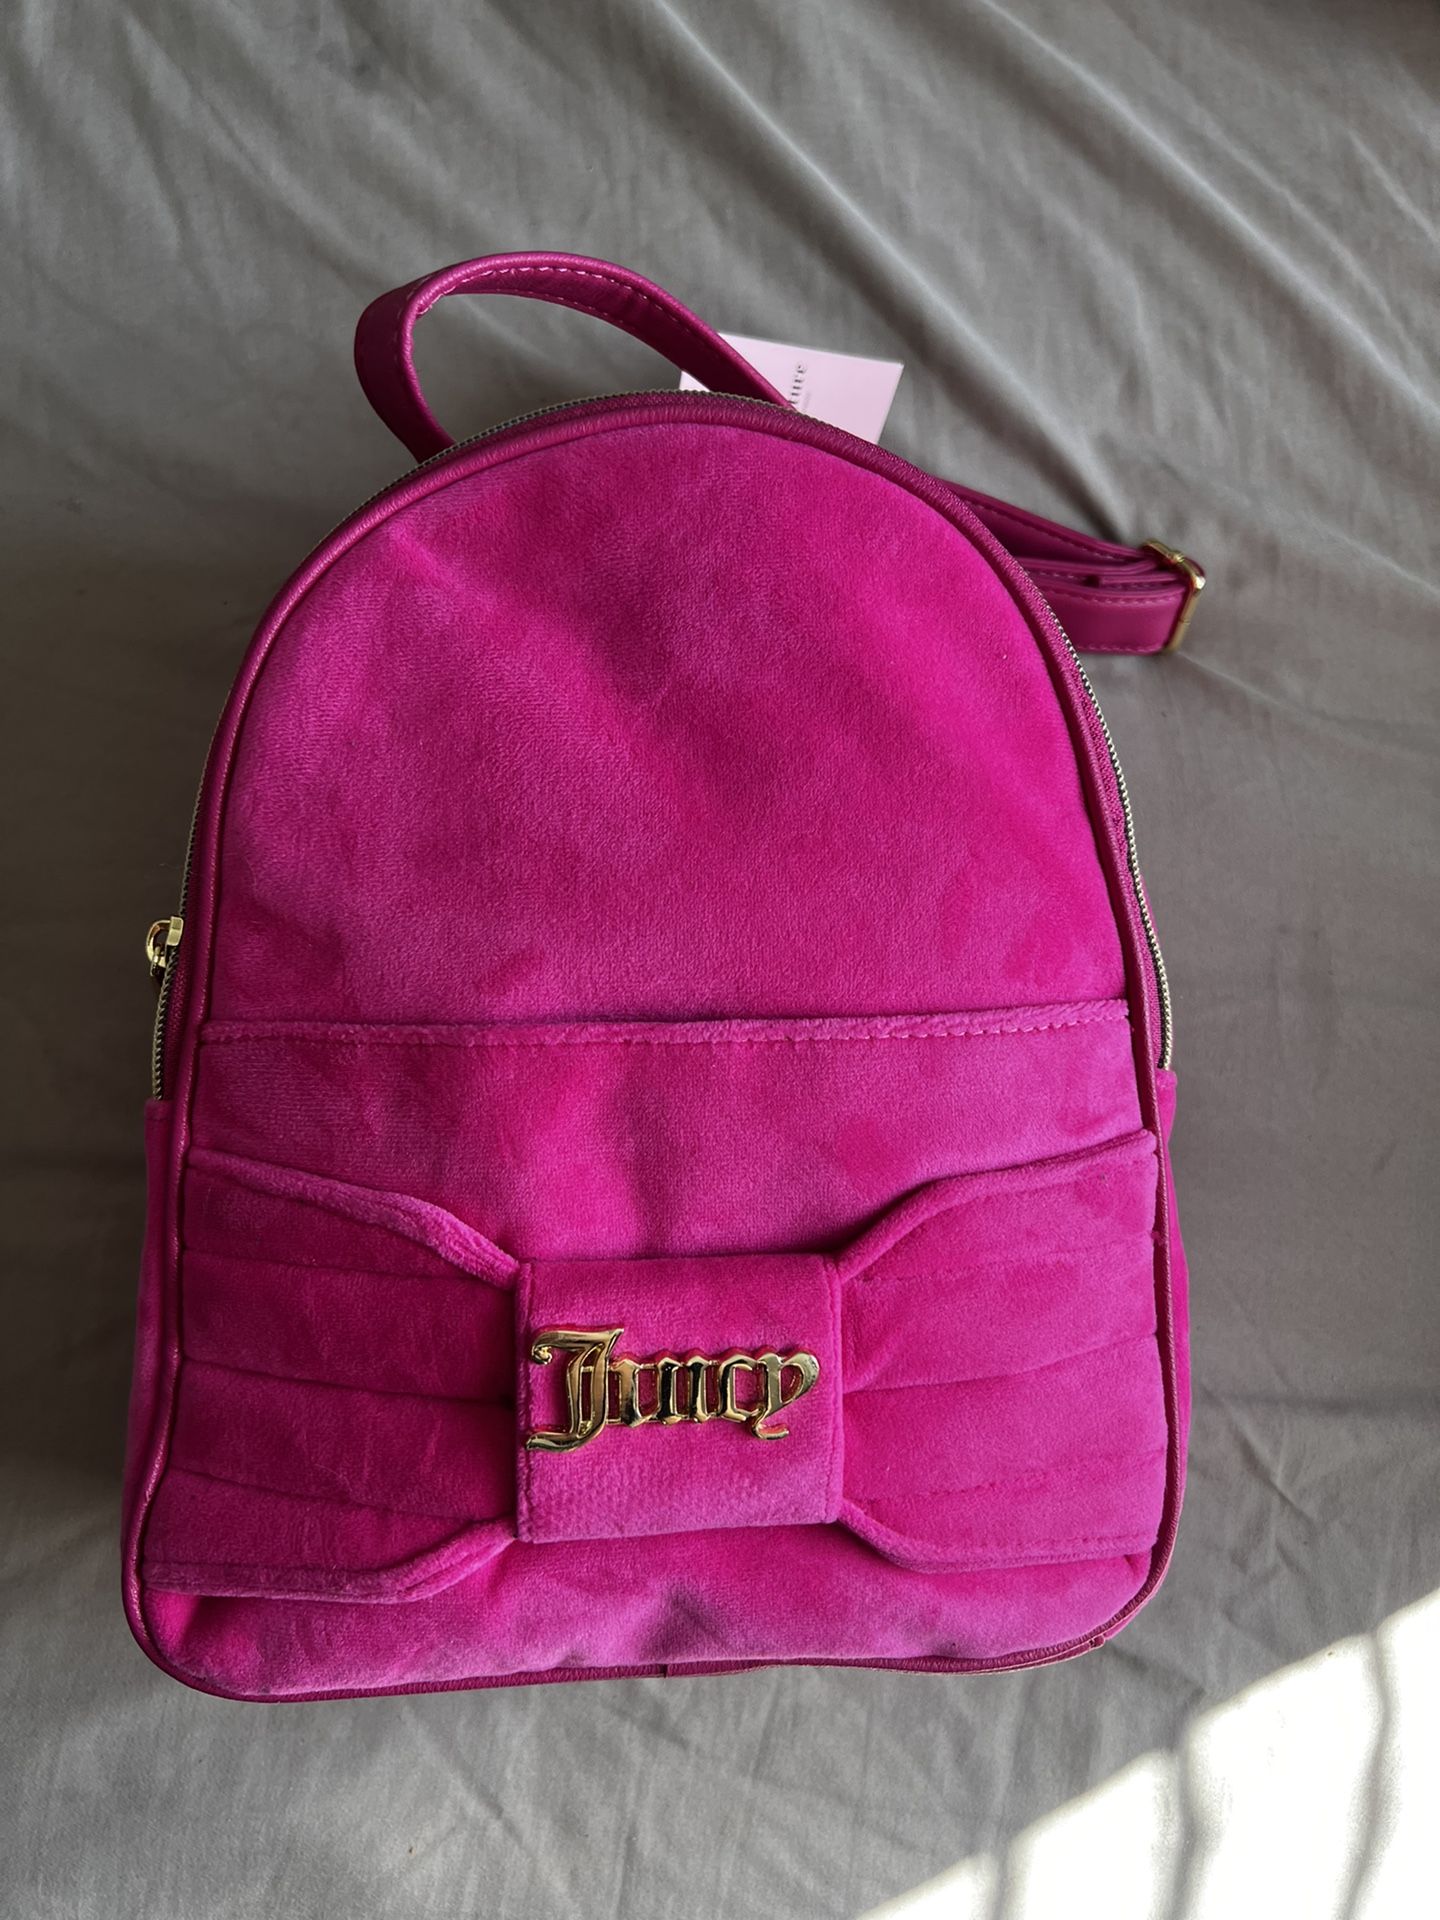 Juicy Couture Pink Backpack 